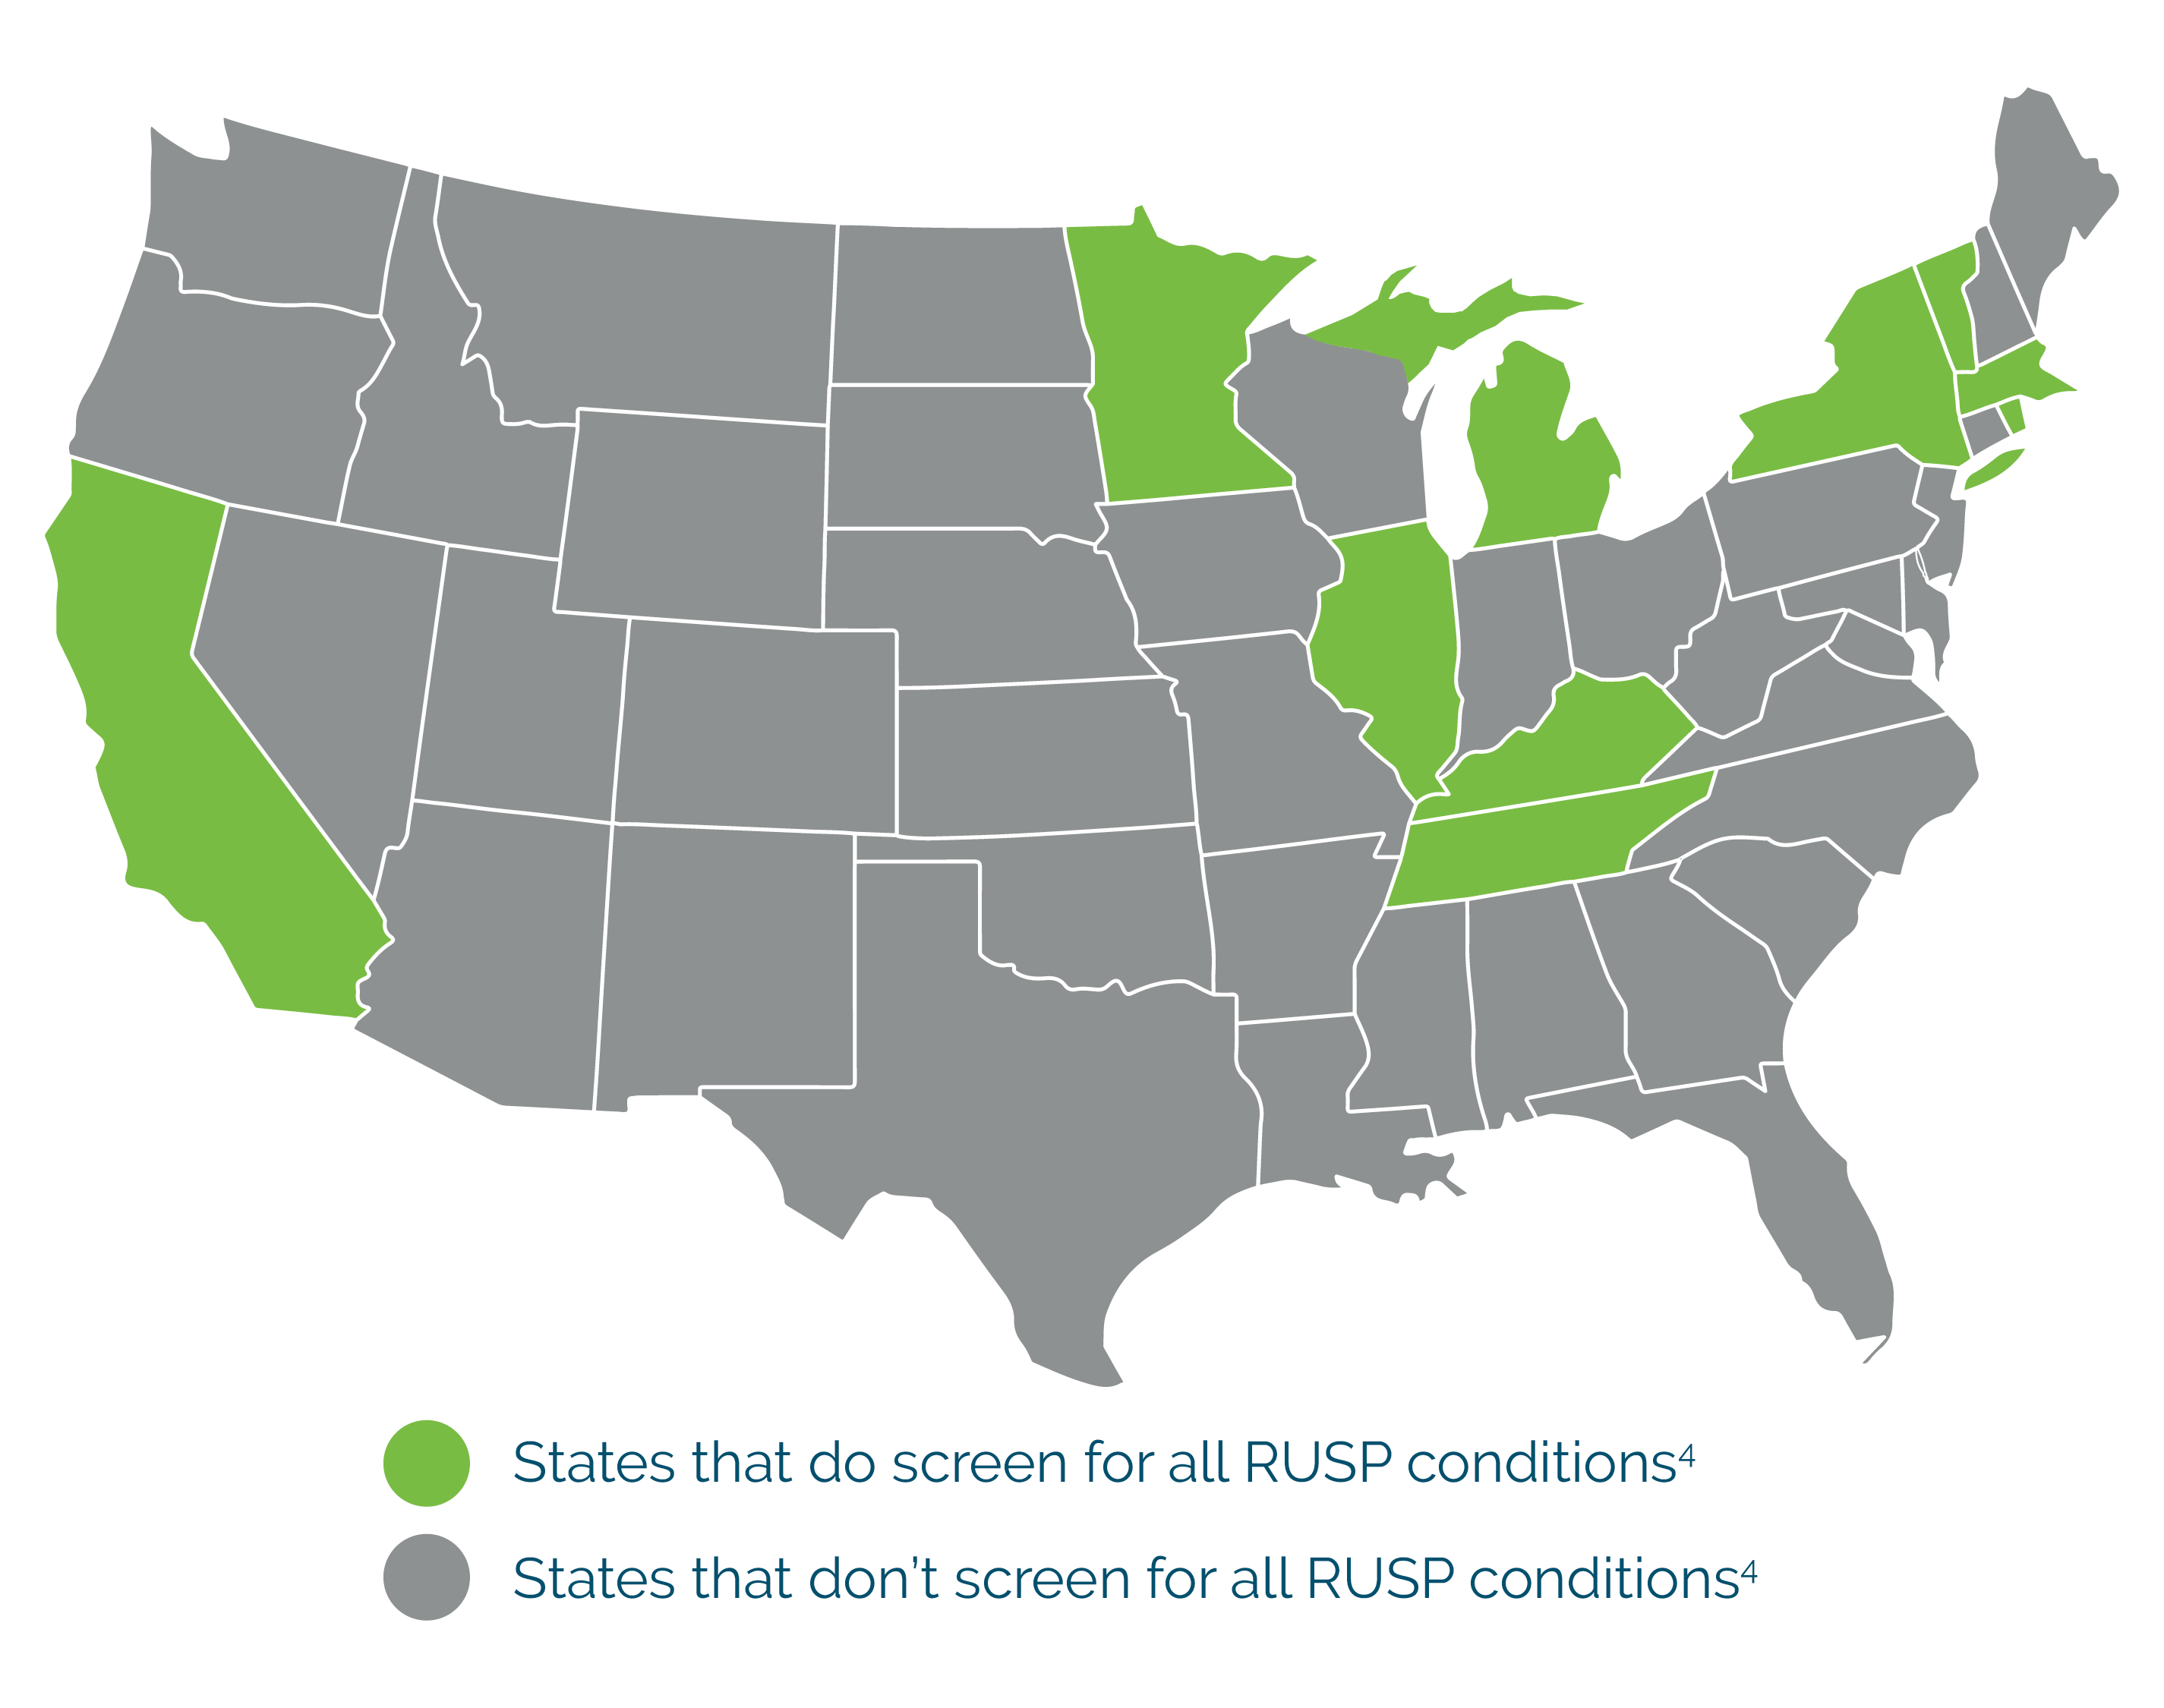 Map showing California, Minnesota, Illinois, Michigan, Kentucky, Tennessee, New York, Vermont, and Massachusetts screen for all RUSP conditions. Other states do not.